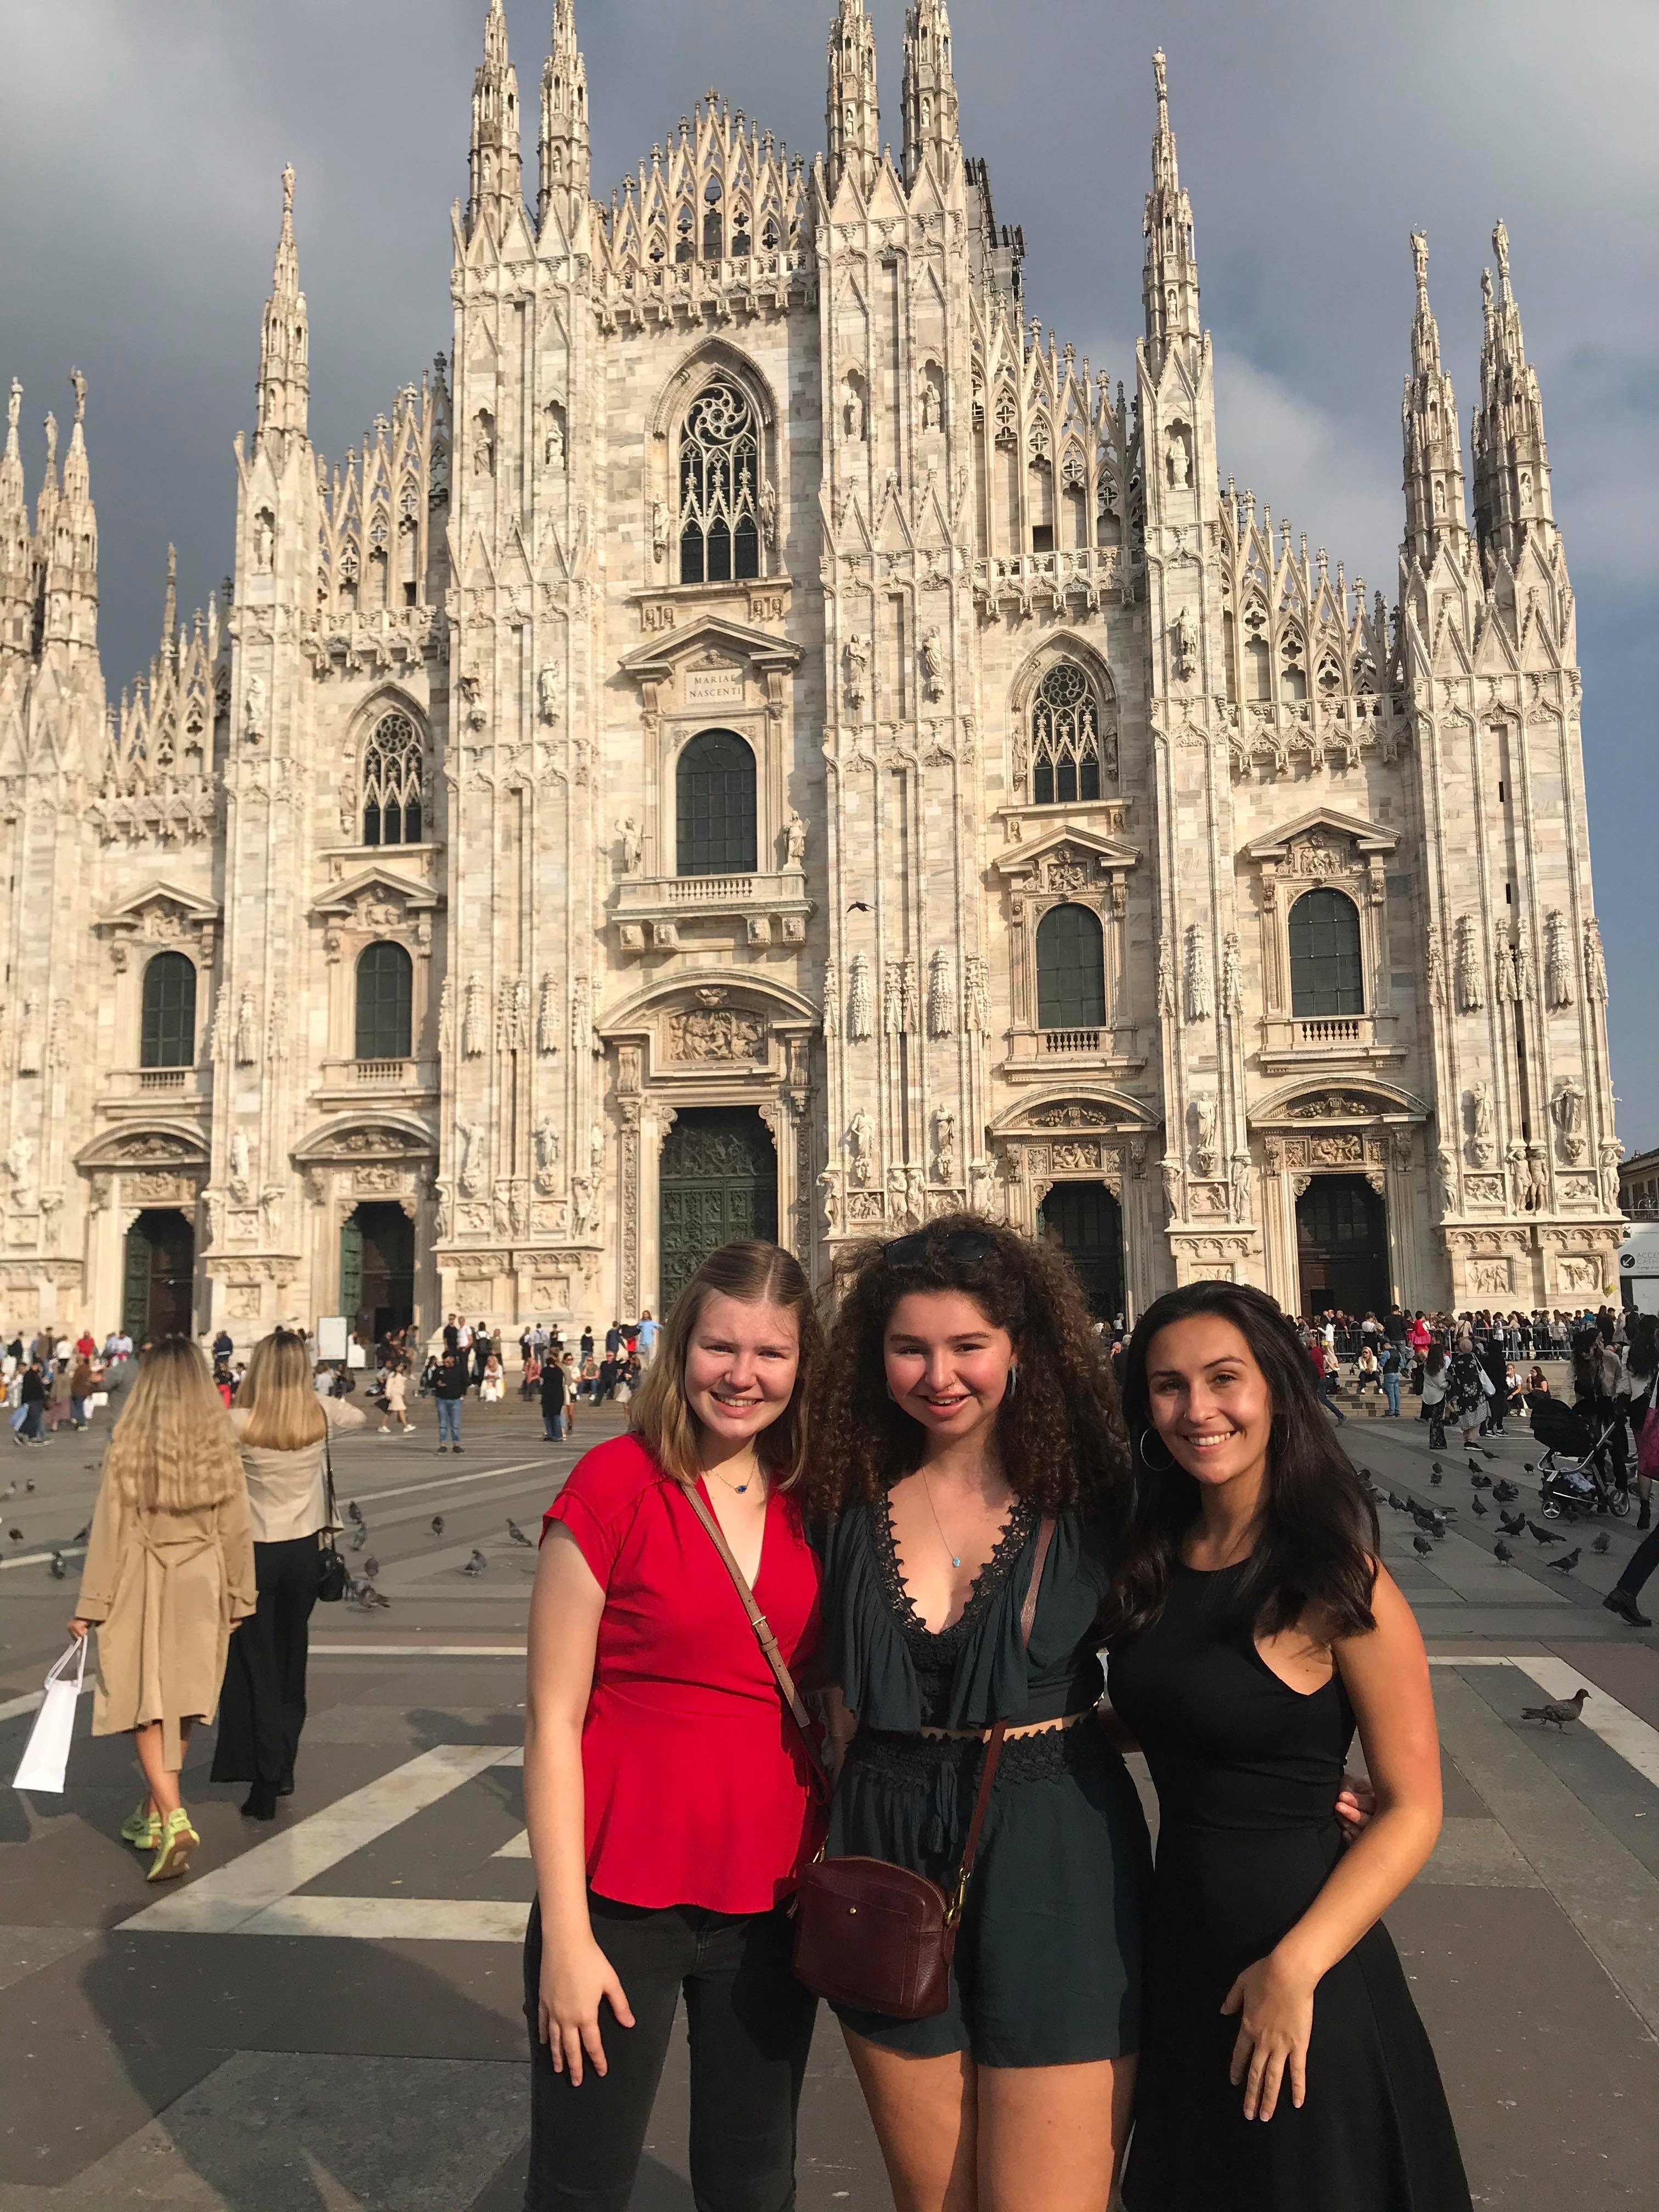 My roommates and I in front of the Duomo